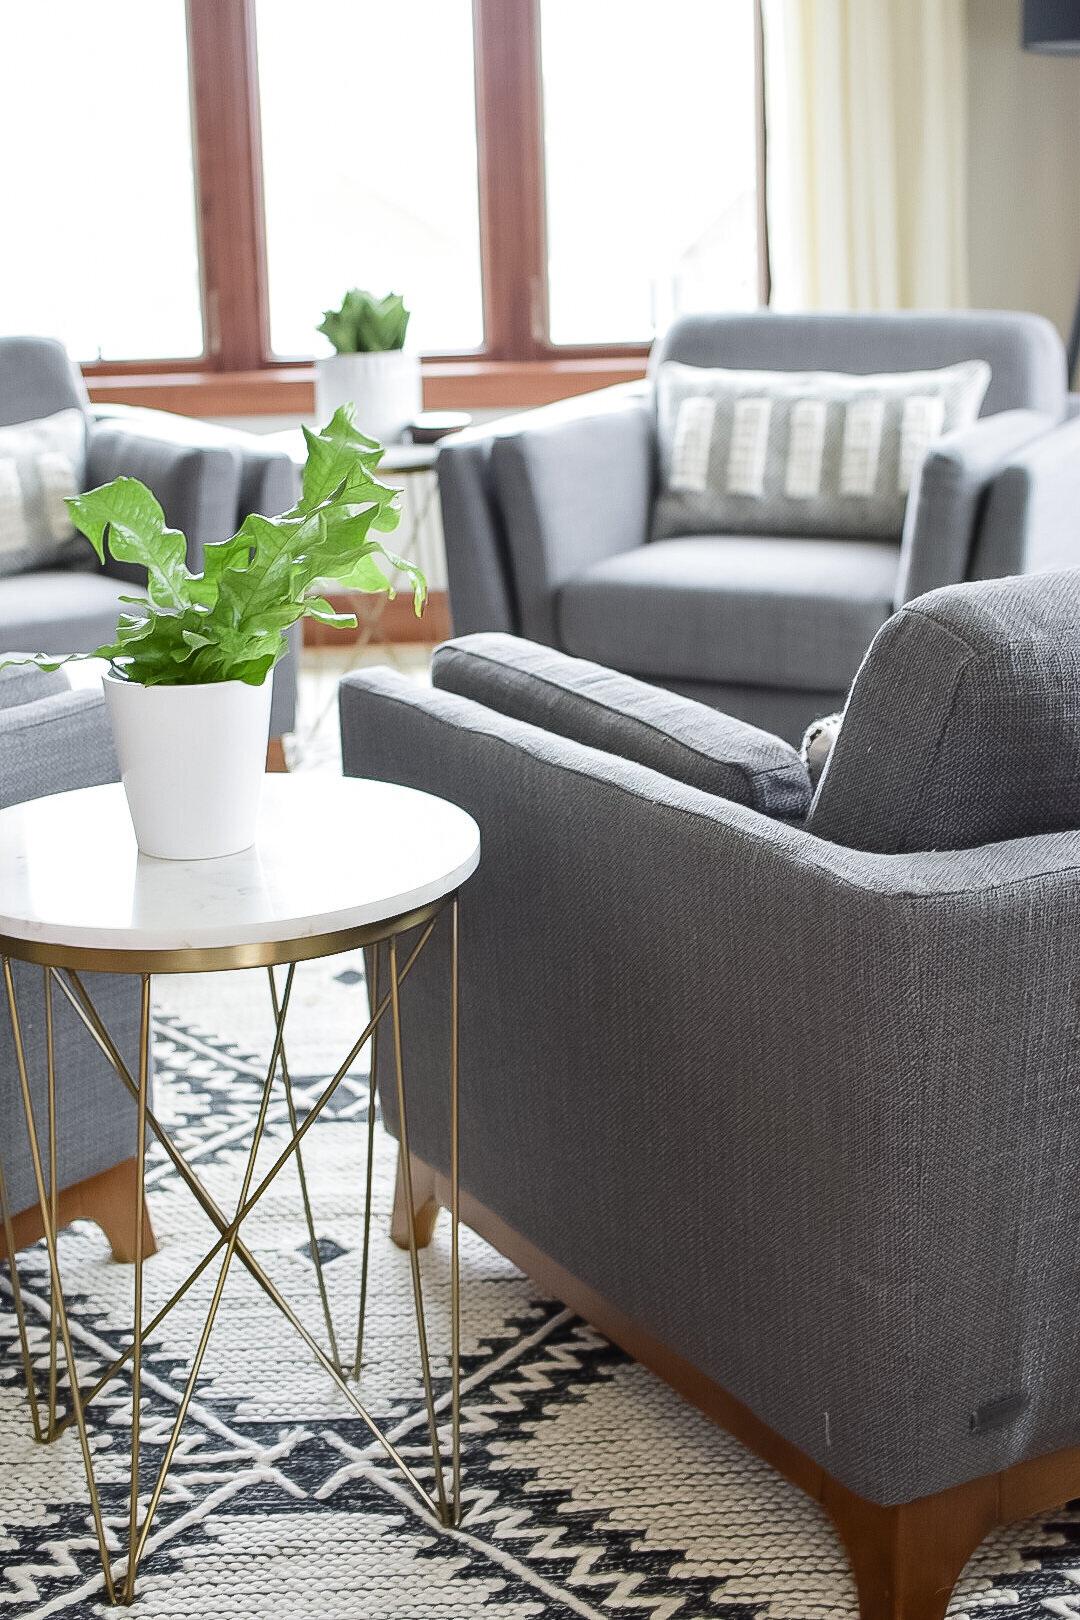 A modern grey armchair in a home seating area